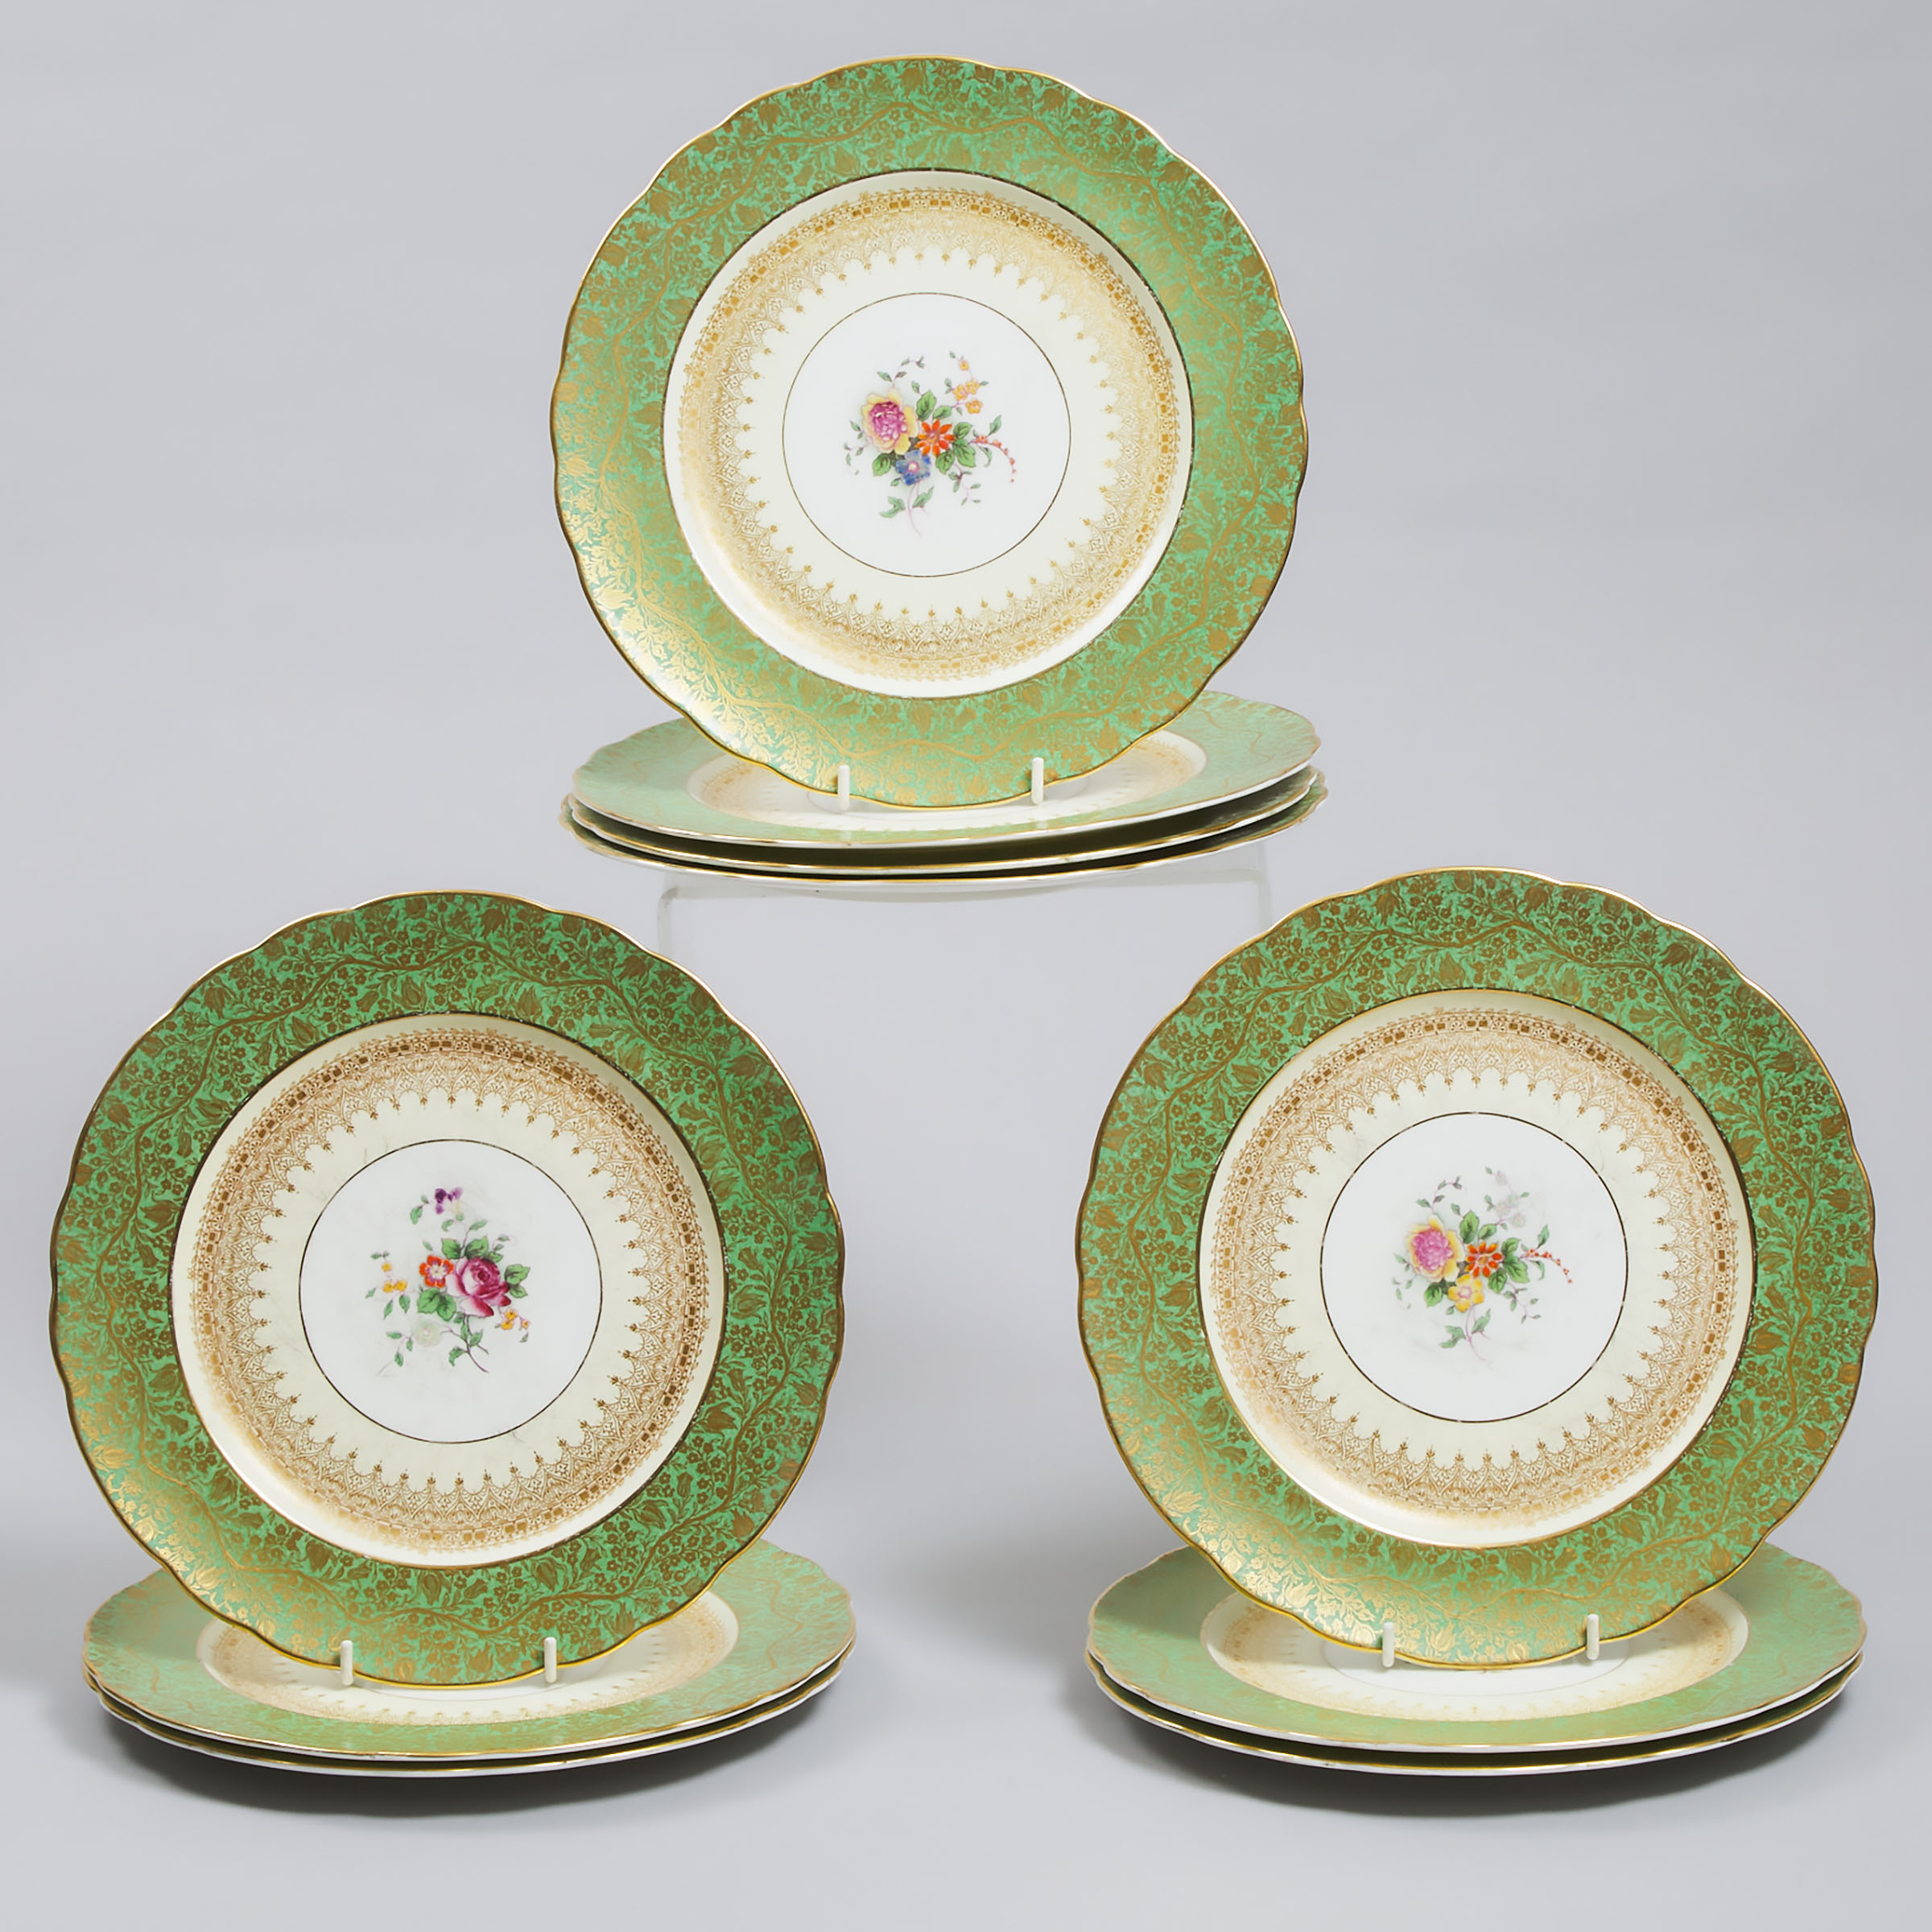 Ten George Jones Floral and Gilt Decorated Plates, c.1891-1921